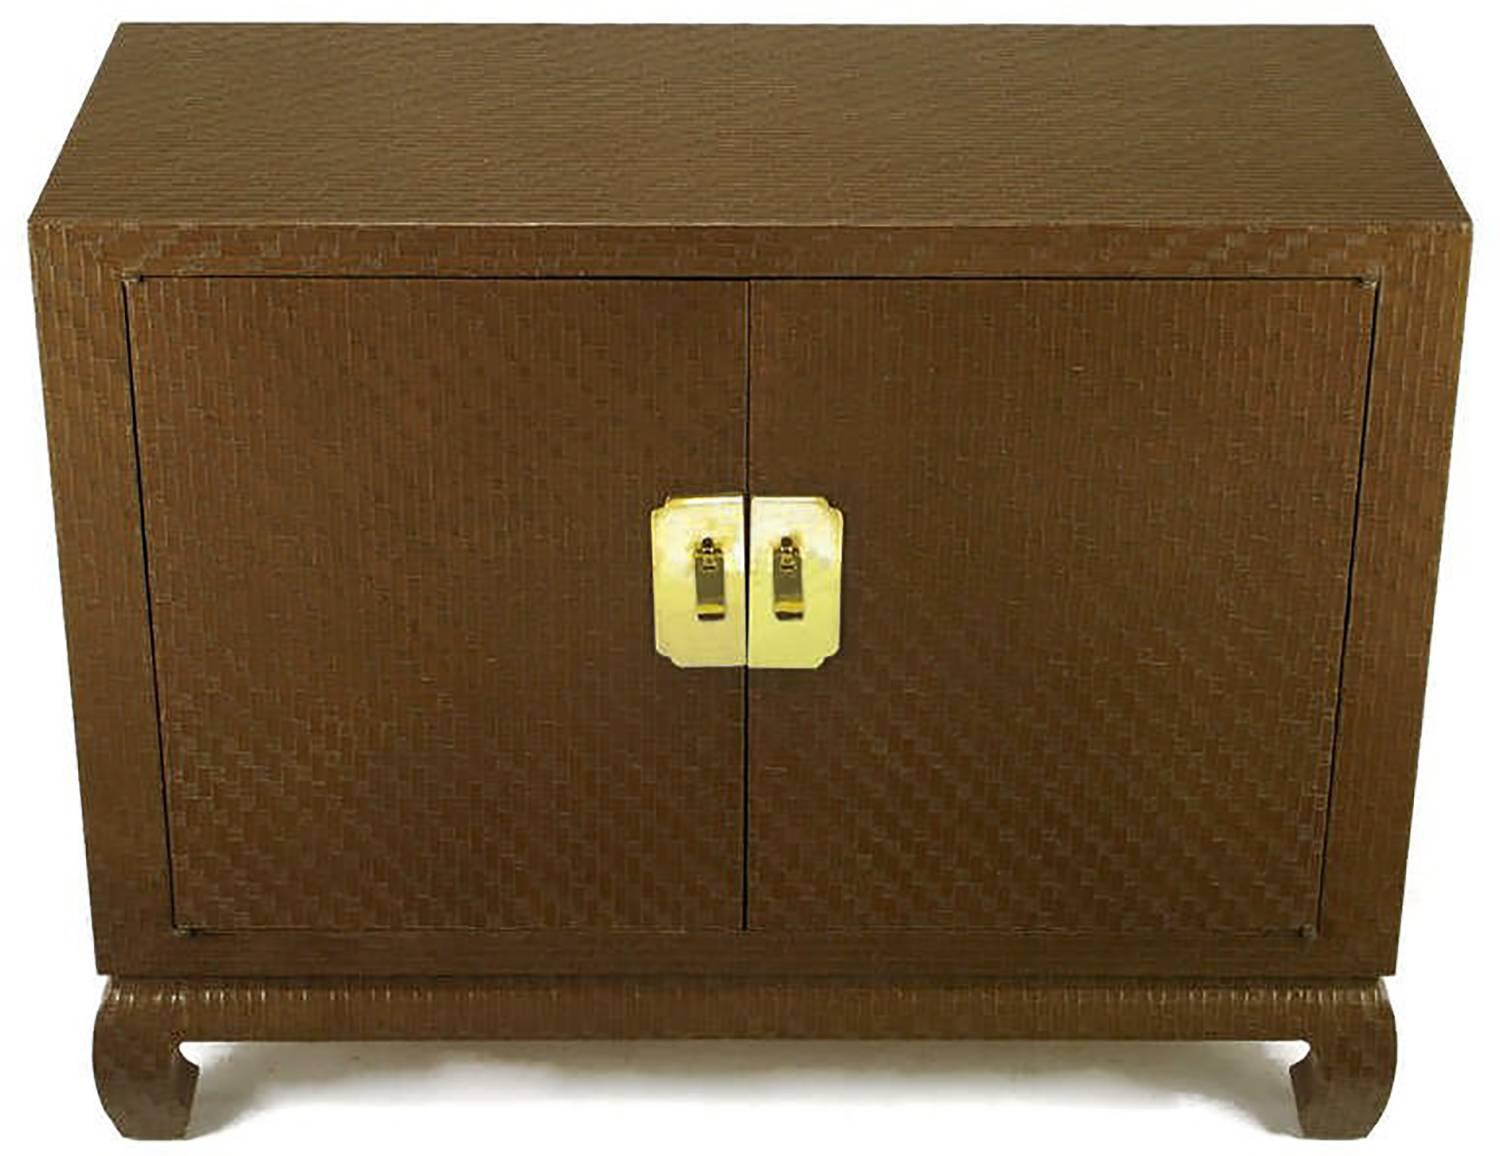 Baker Asian modern cabinet in chocolate lacquered Grassclotha chocolate brown lacquered grasscloth cabinet from Baker's Far East collection. Ming style turned legs and large brass escutcheons backing solid brass drop pulls. The lacquered grass cloth